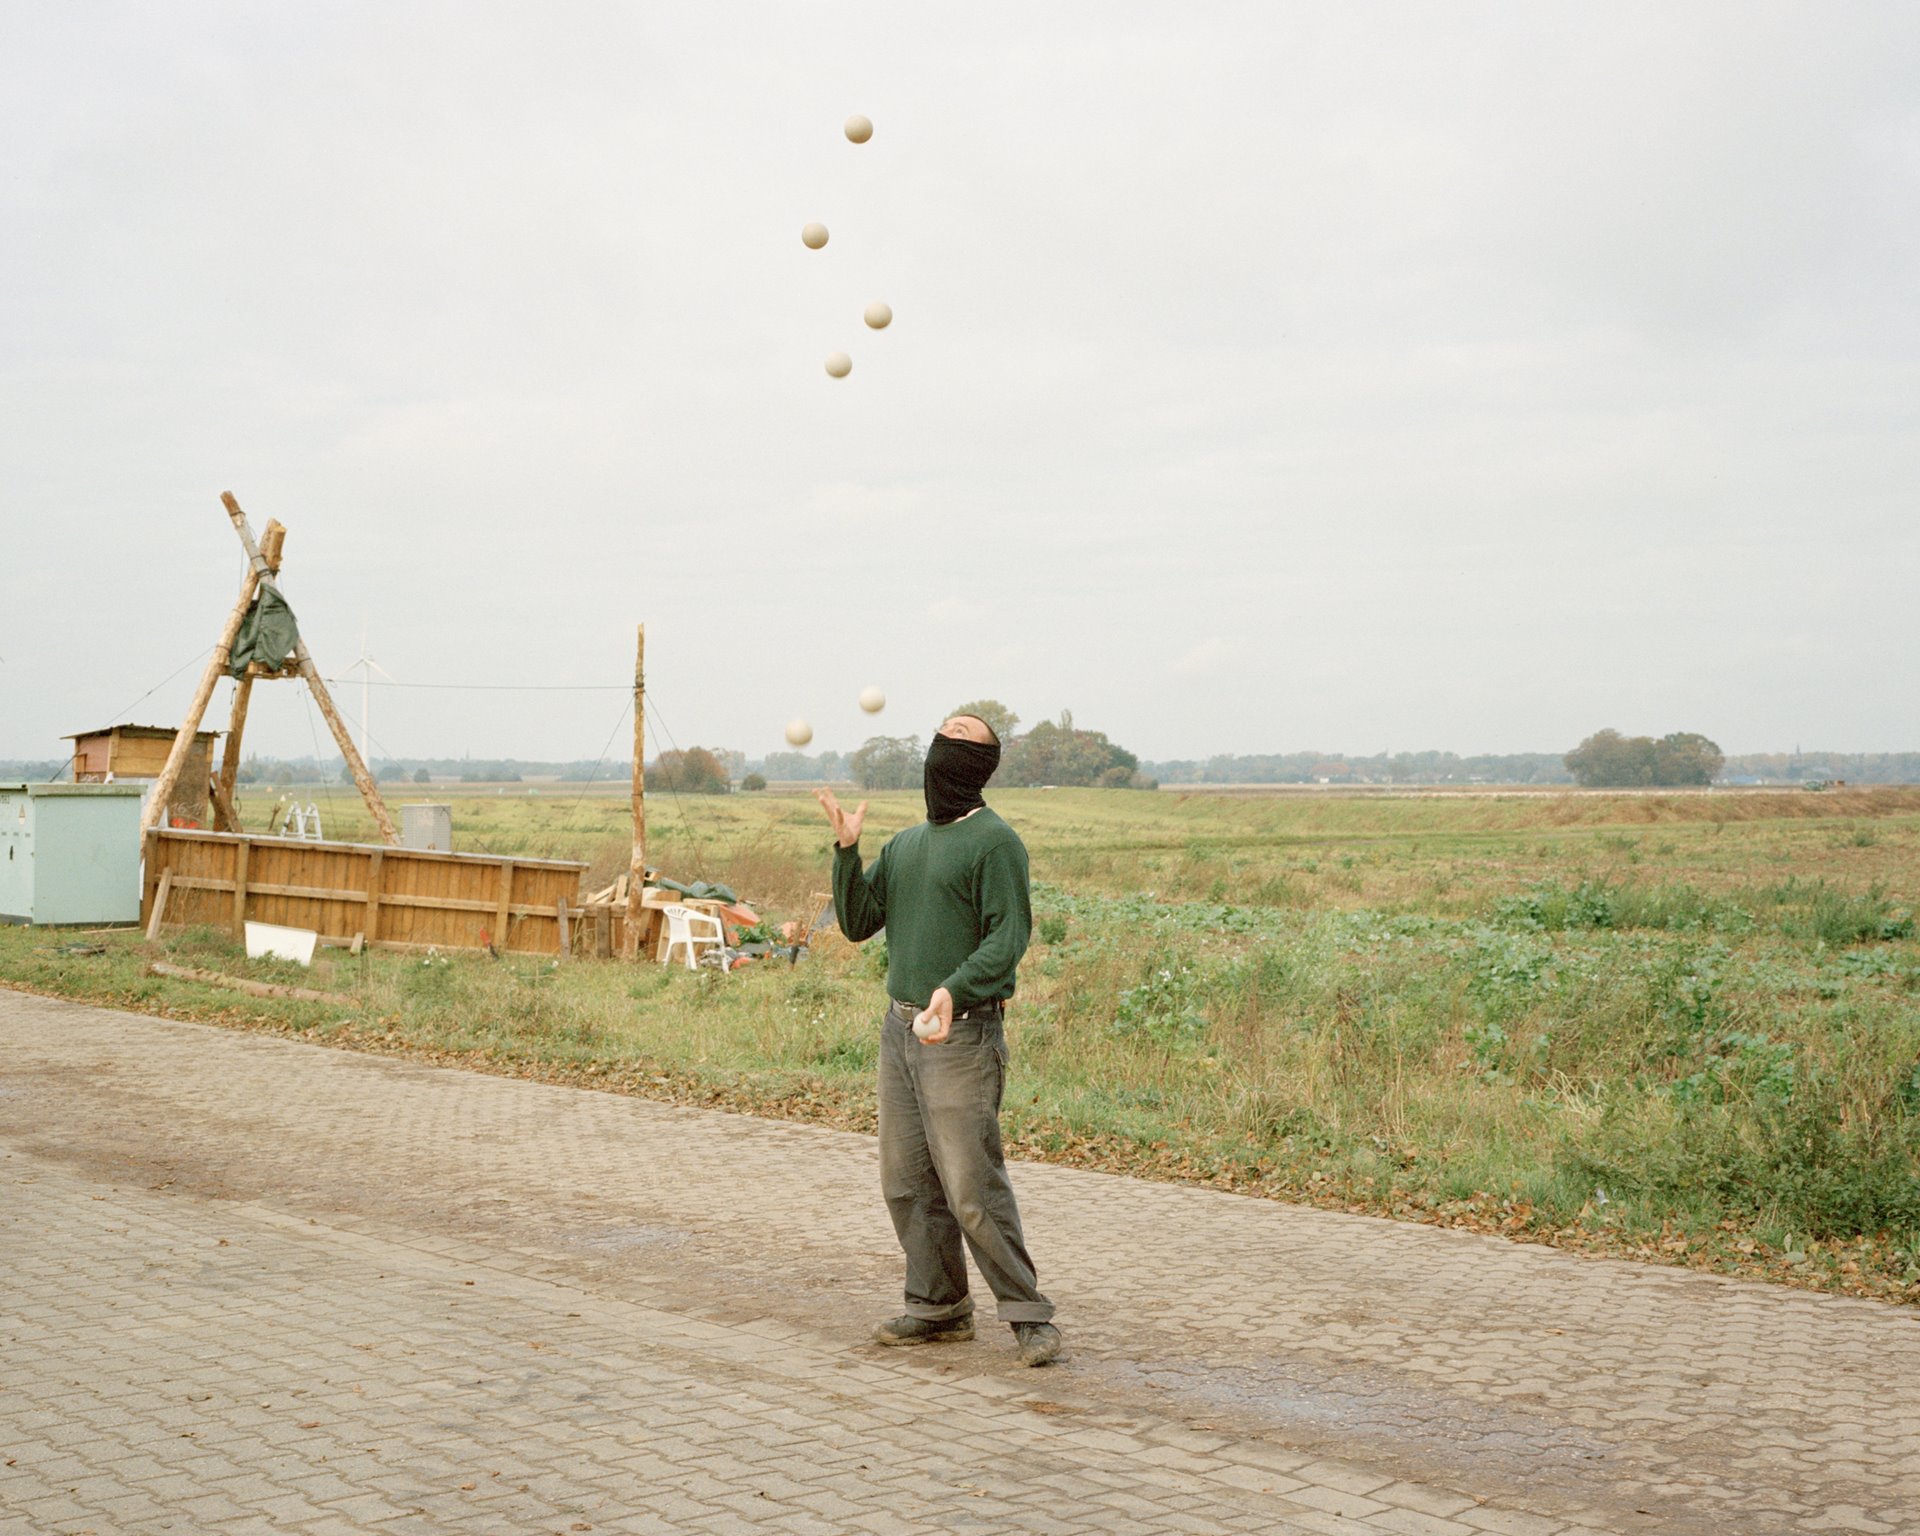 &quot;Stanislav&quot; juggles at a checkpoint along an access road to Lützerath, Germany. Activists tried to monitor traffic so that they could block the road if demolition machinery began to arrive.